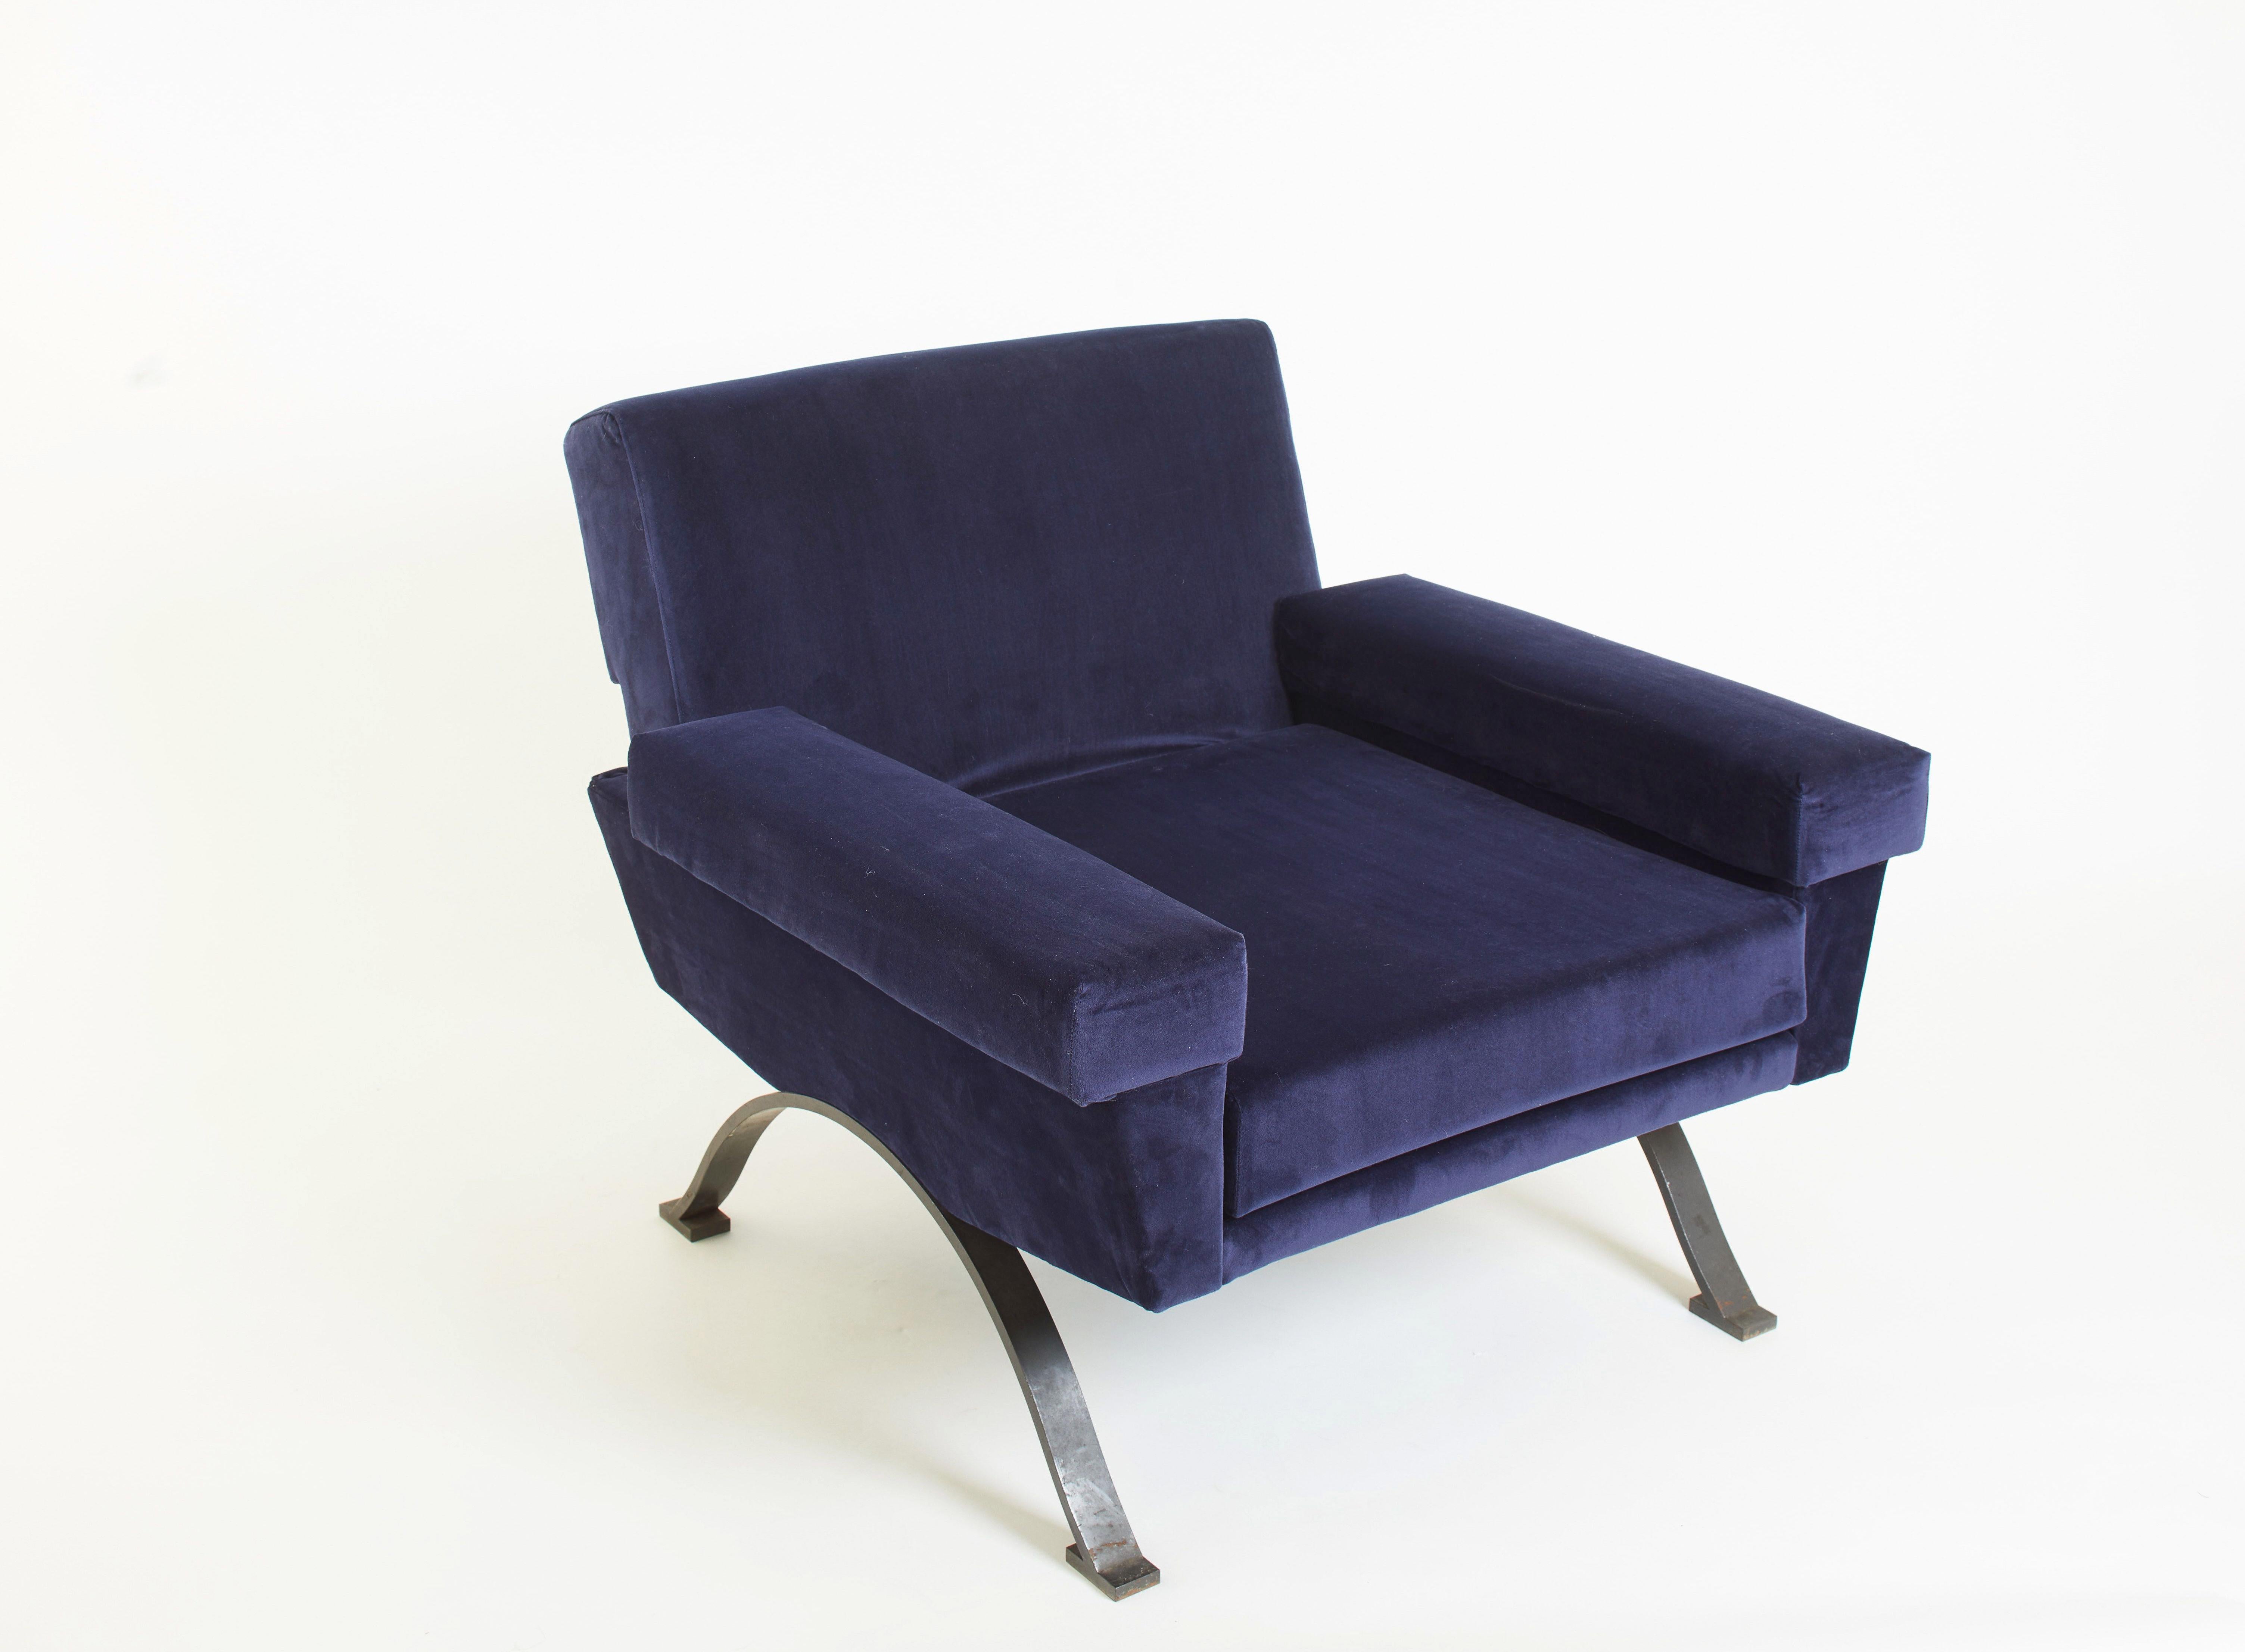 1950s Italian pair of blue velvet lounge chairs with black metal legs. Fully restored and reupholstered.